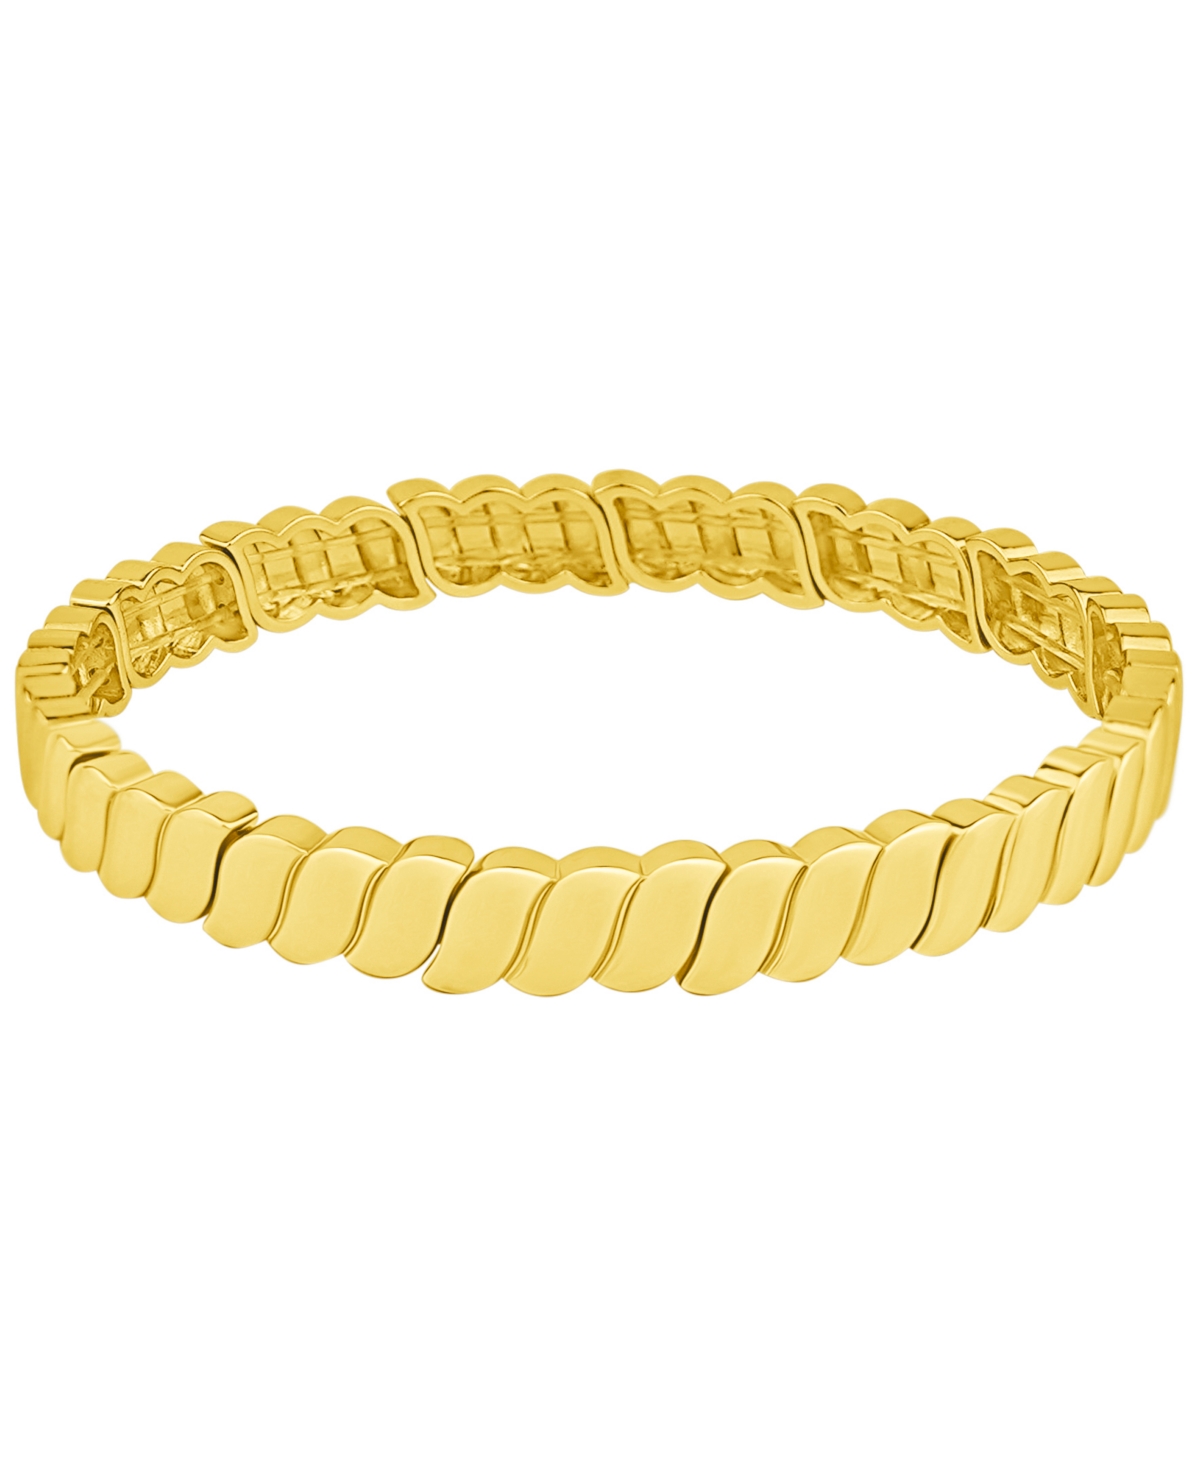 And Now This High Polished Stretch S Textured Bracelet In 18k Gold Plated Brass